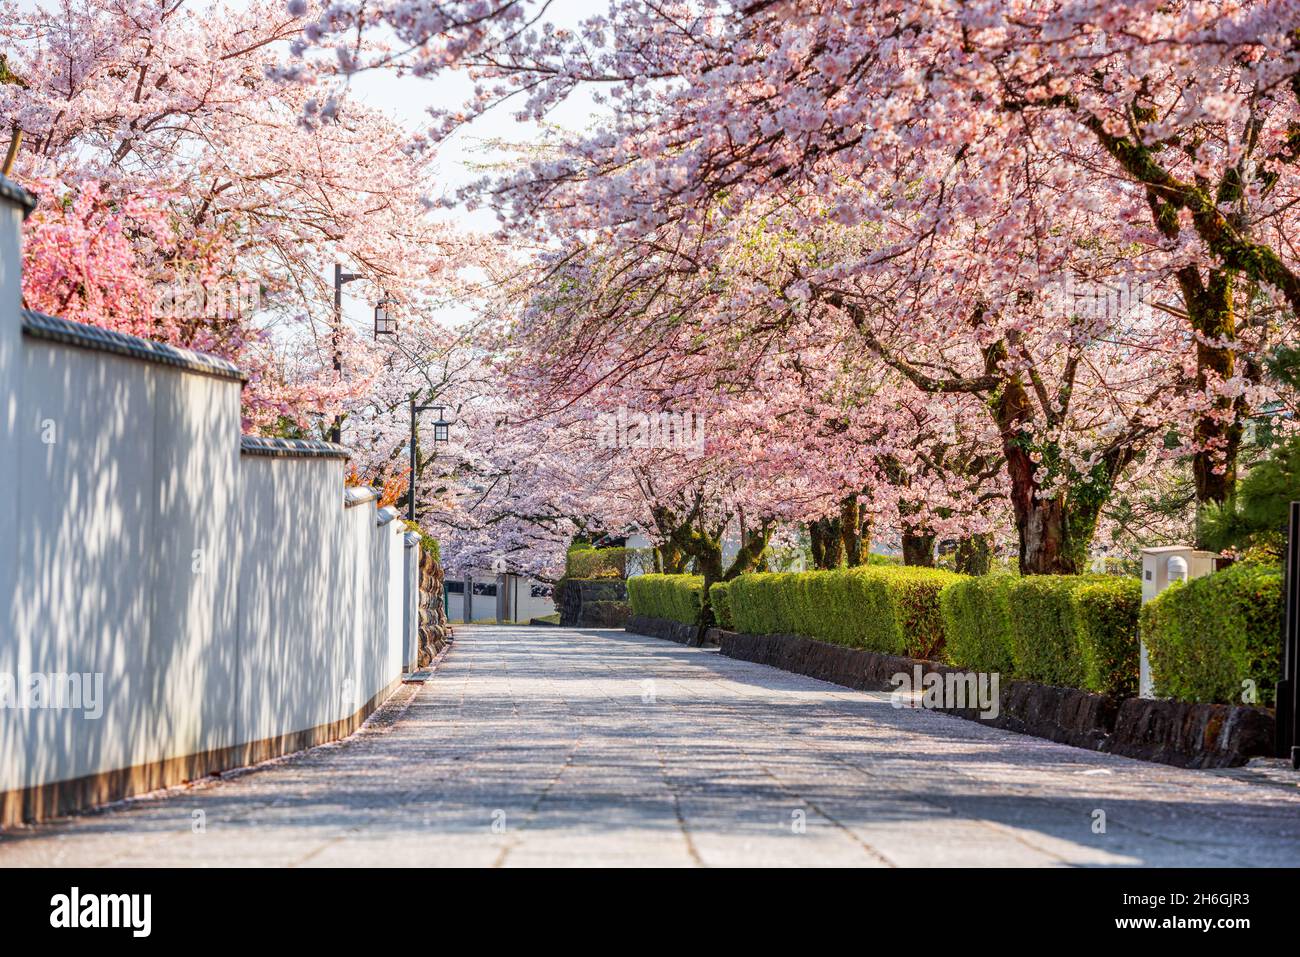 Shizuoka, Japan old town streets with cherry blossoms in Spring season. Stock Photo